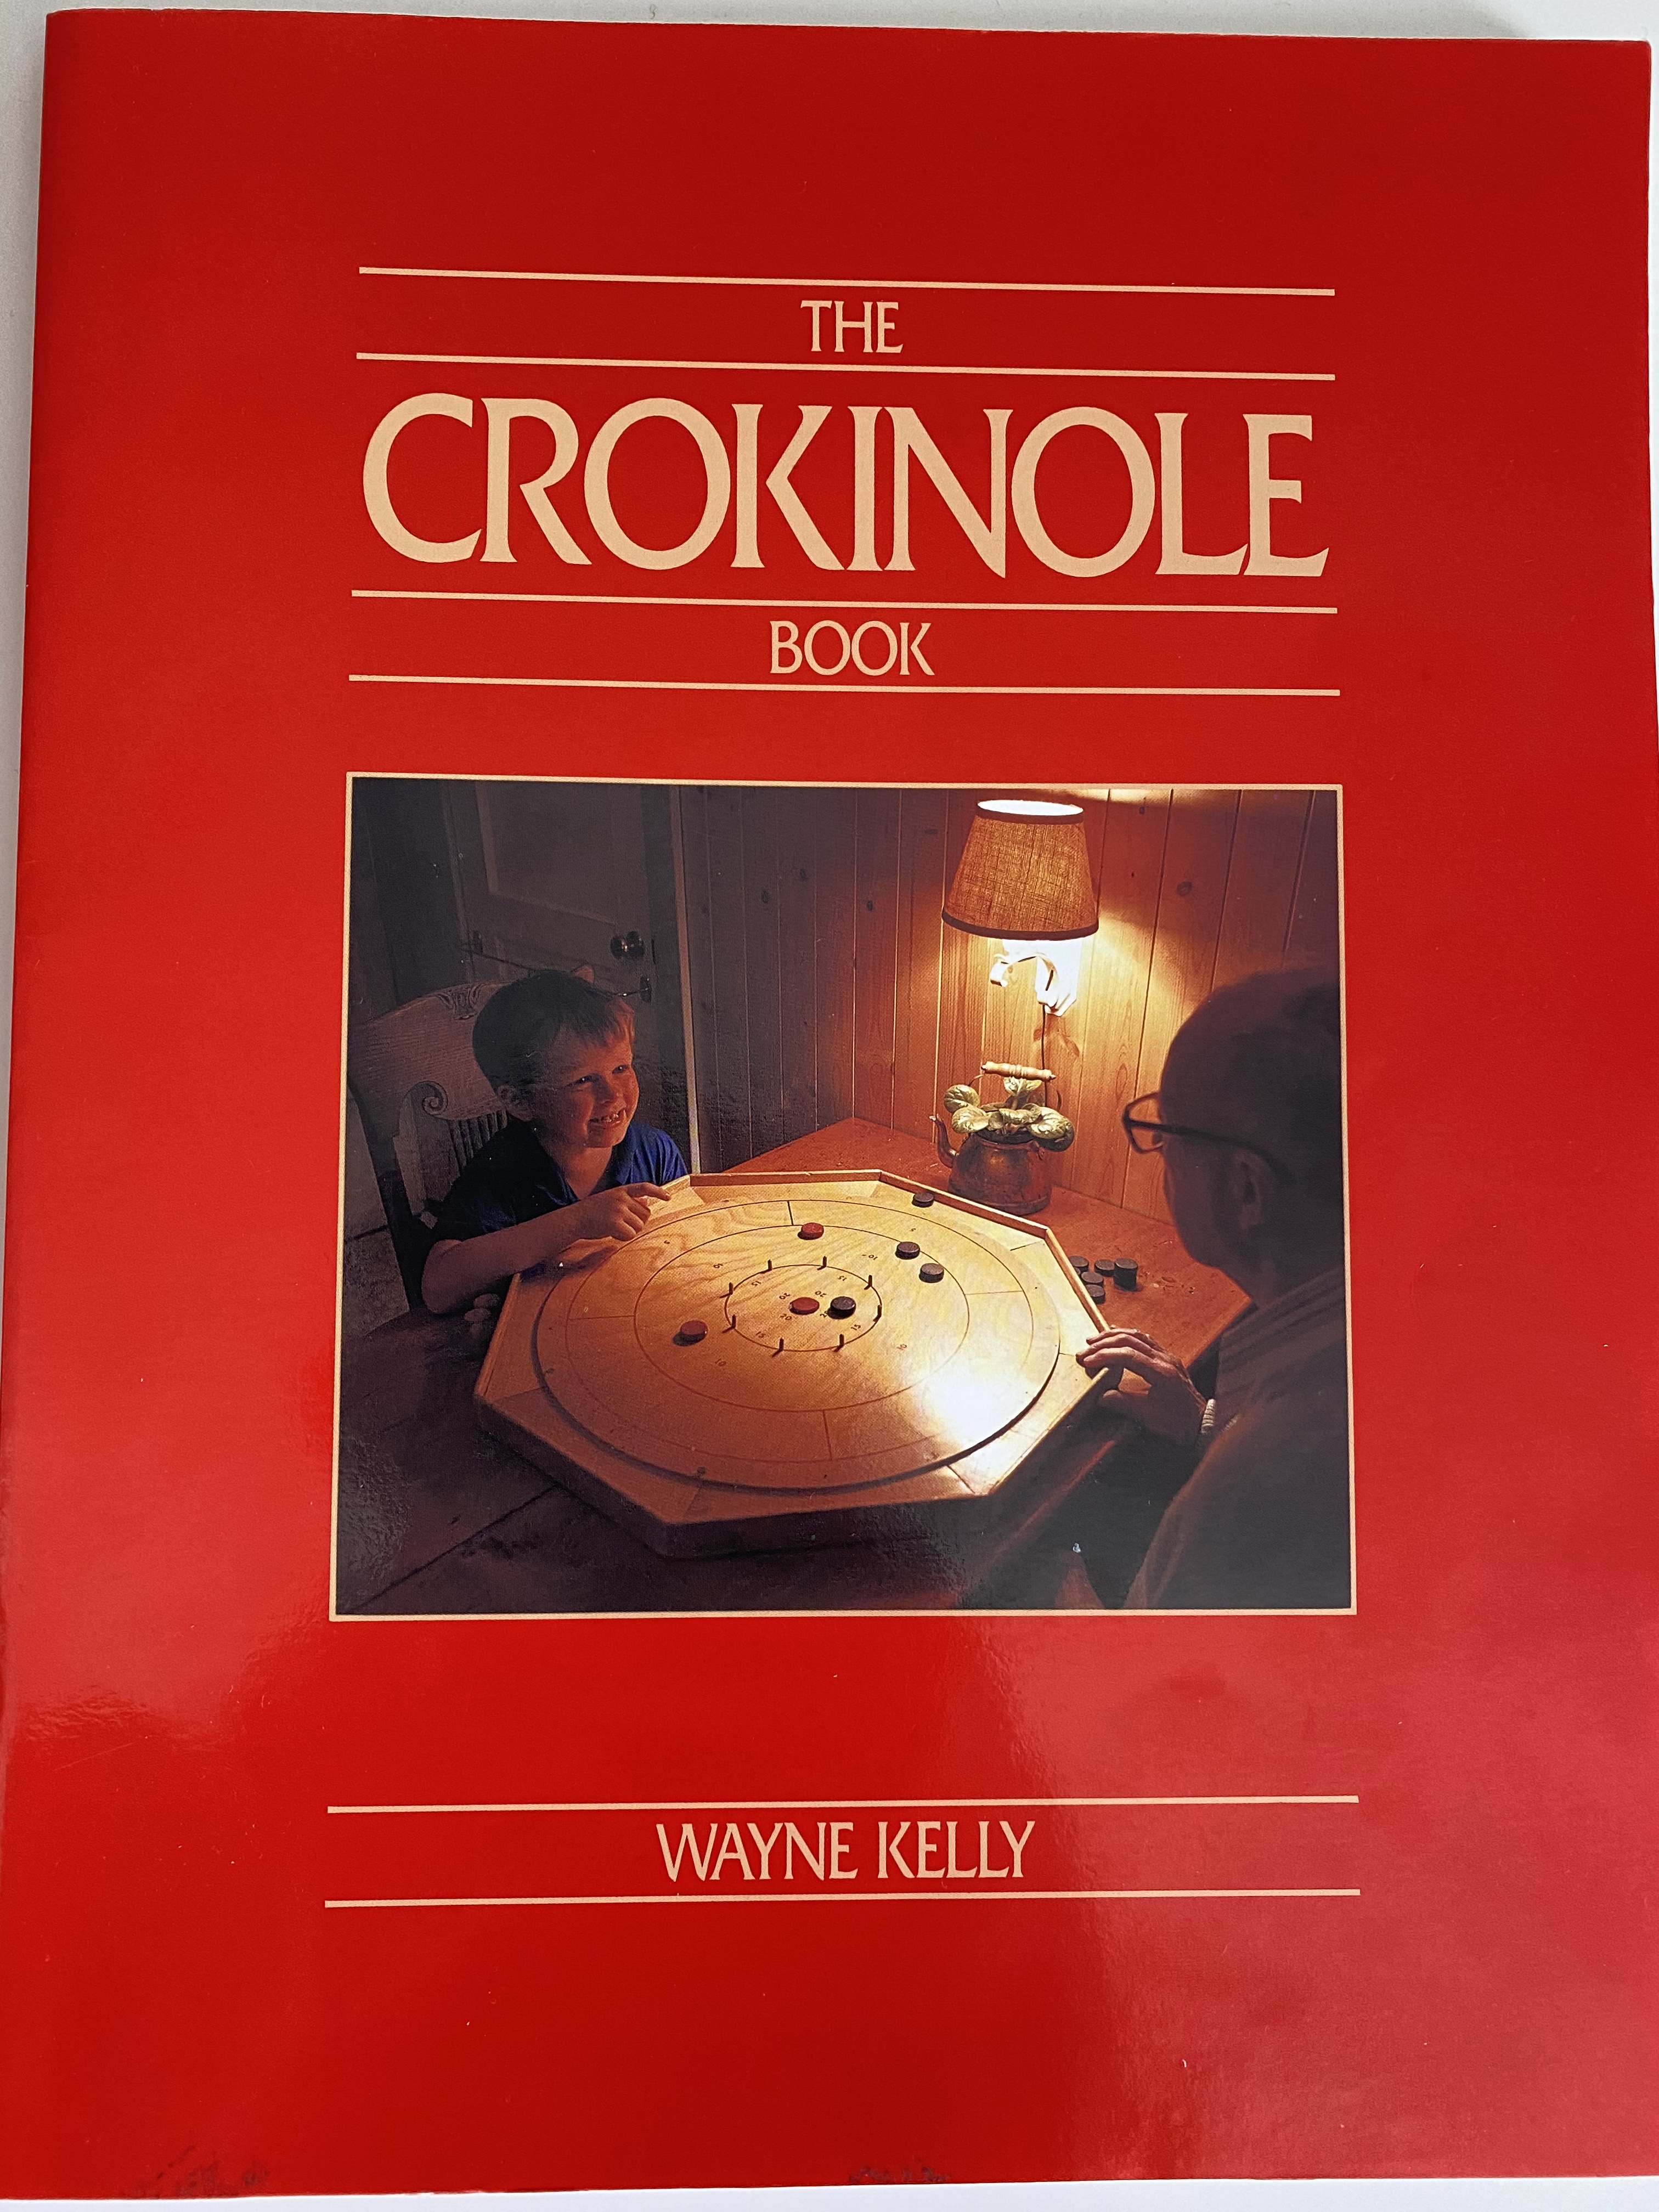 The beginner's guide to the greatest pastimes: Crokinole